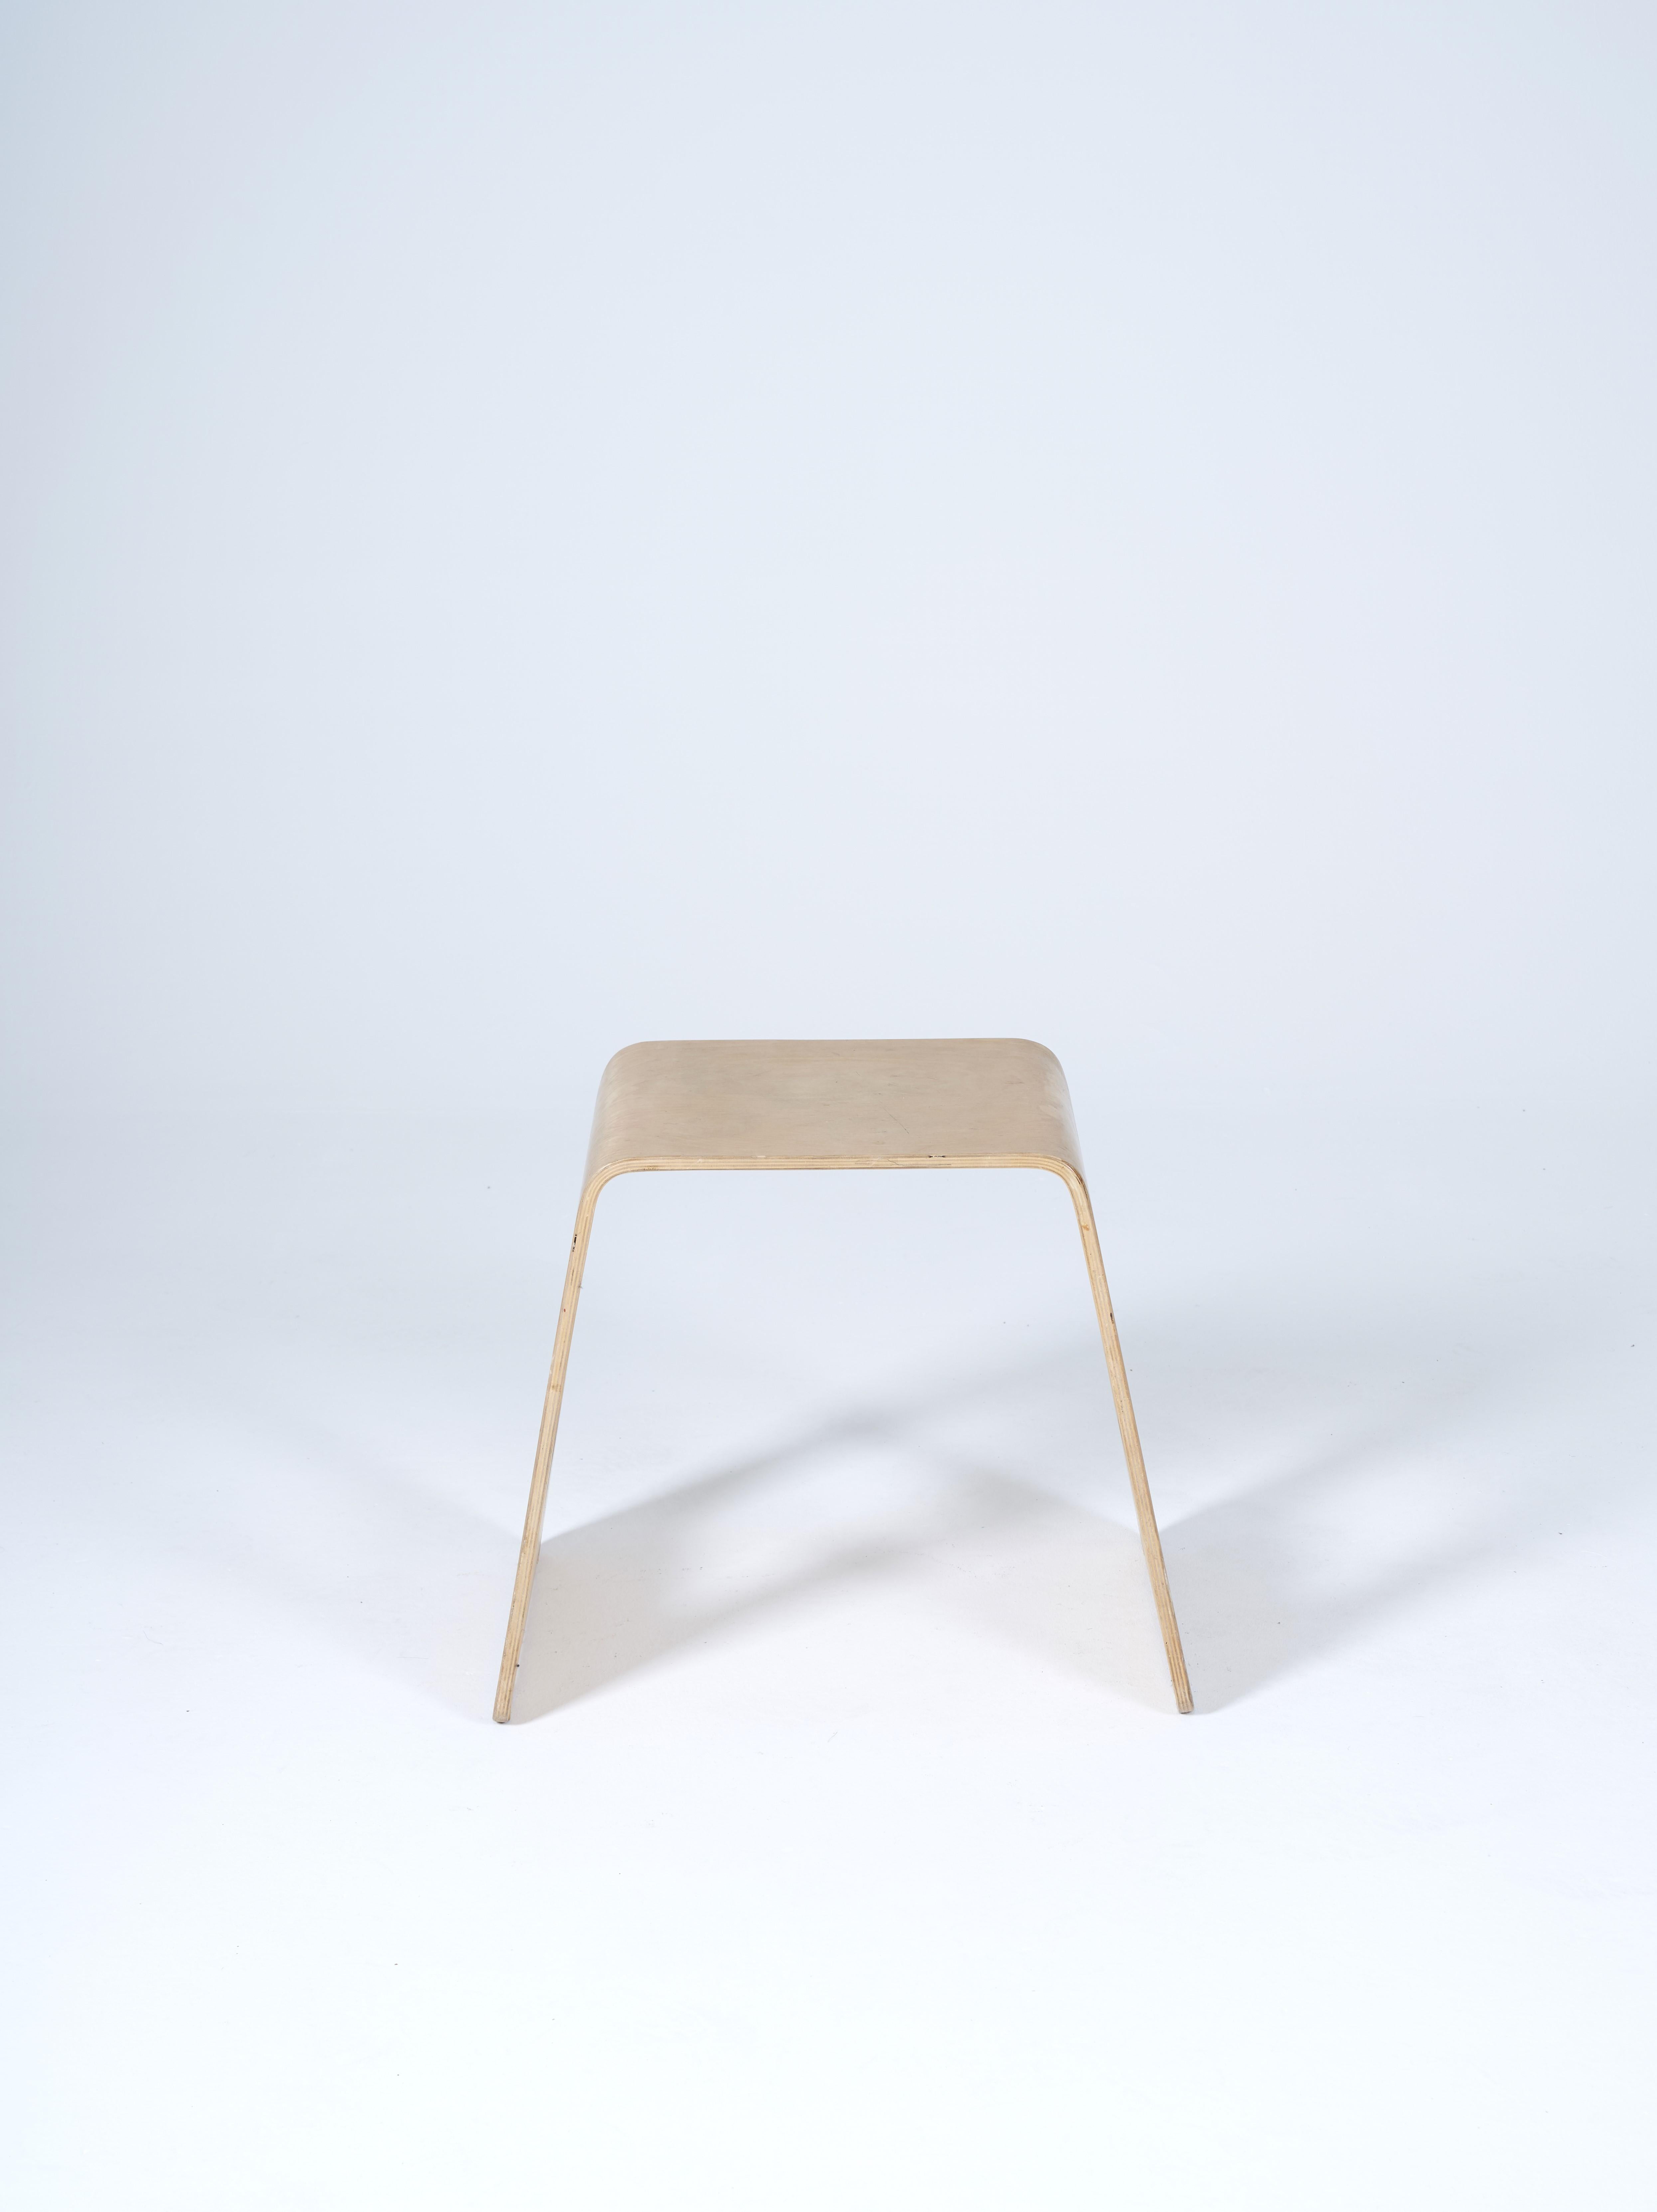 Multipurpose furniture (table, bedside or stool) created by Lisa Norinder for IKEA in the 2000s.
Plywood. Has traces of time, some in perfect condition, others with small chips and cracks.
 